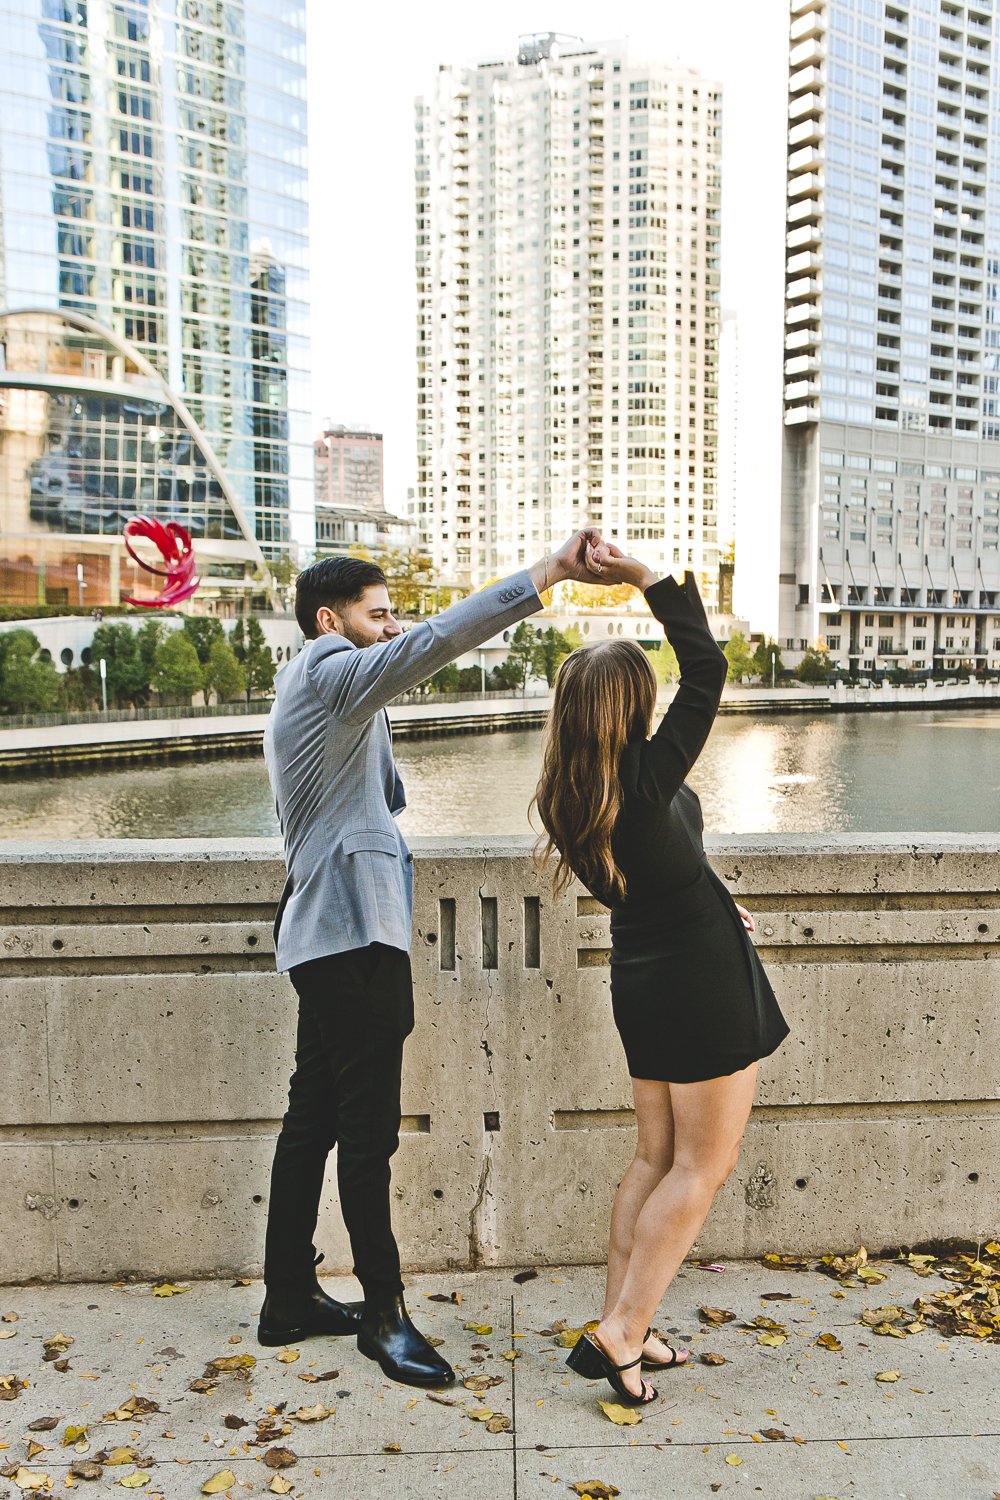 Downtown Chicago Engagement Session_JPP Studios_TaylorKlaus_13.JPG